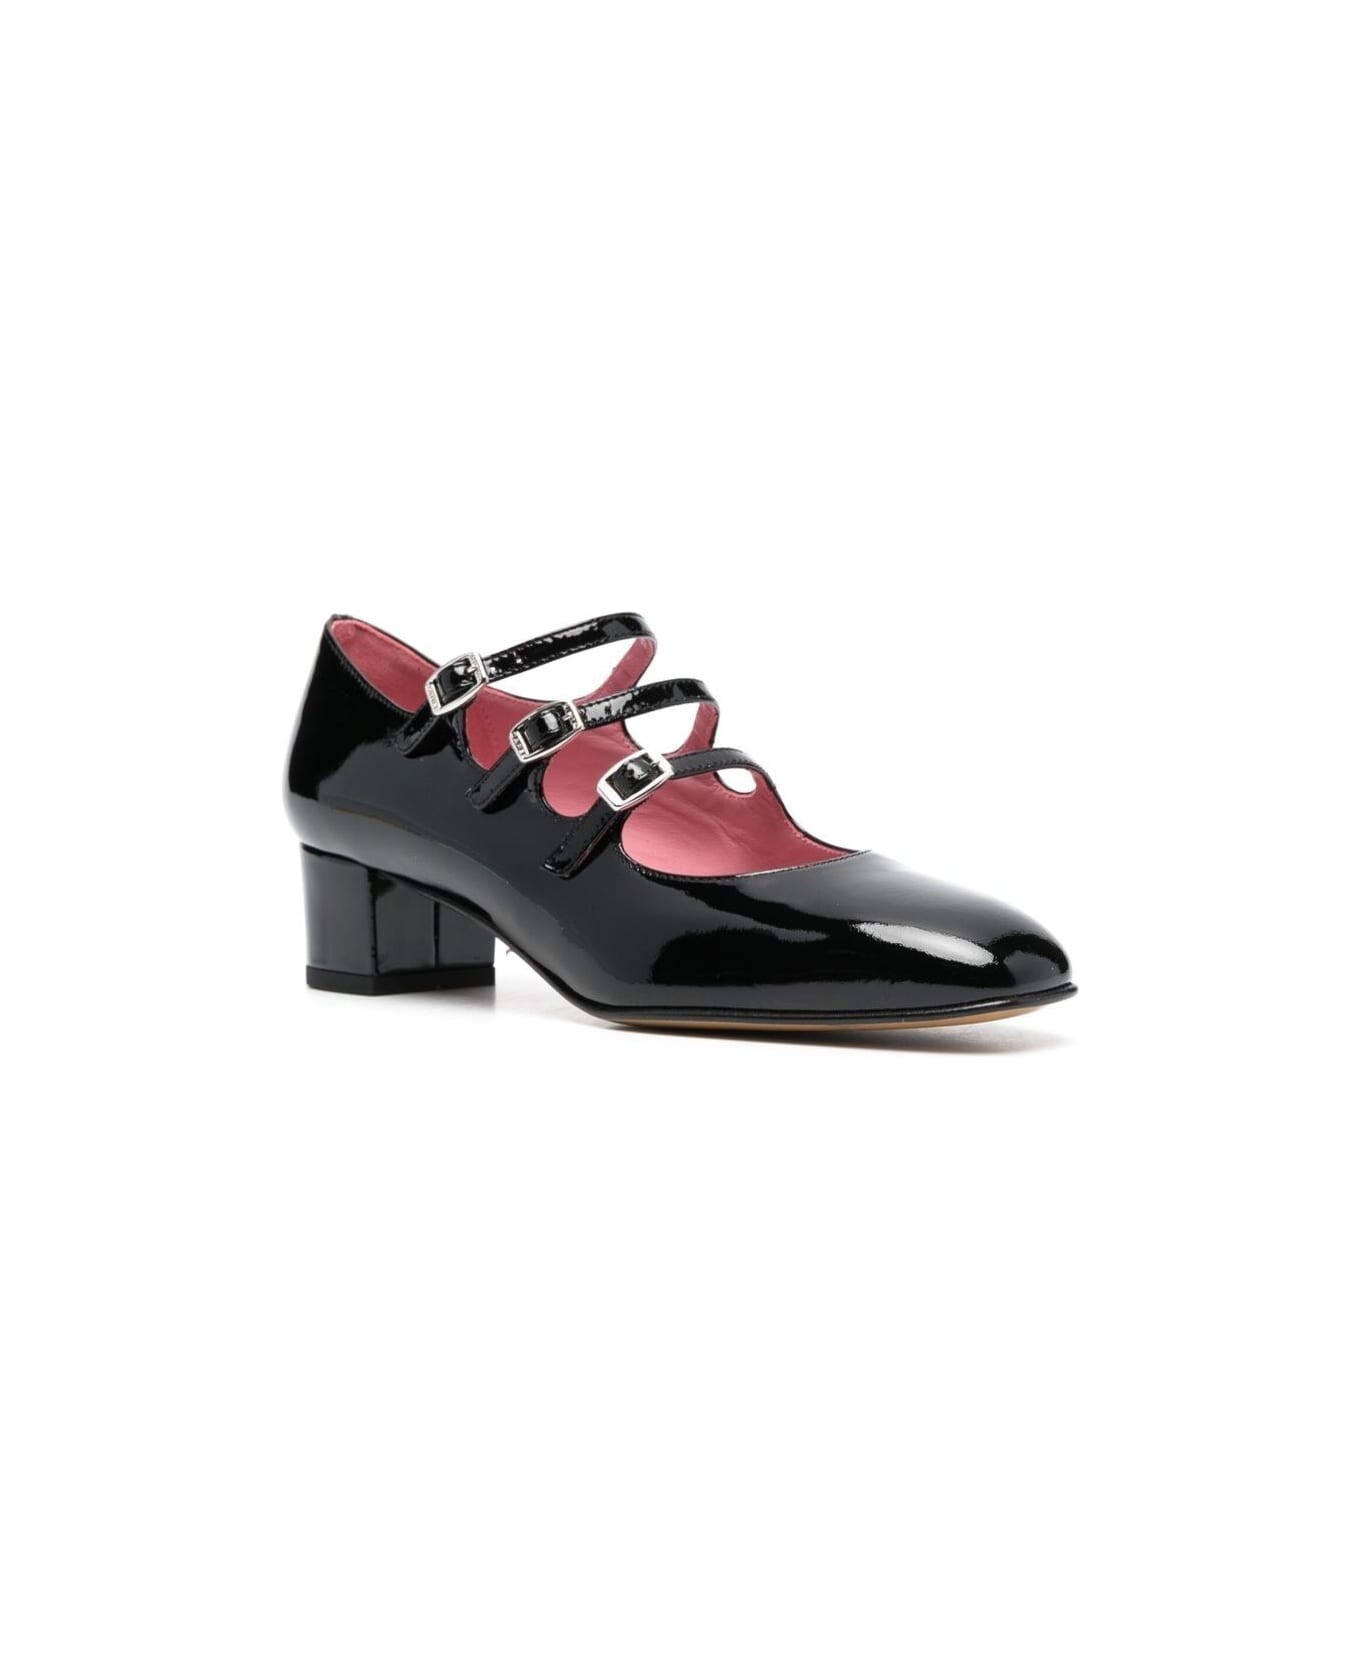 Carel Black Mary Jane Pumps In Patent Leather Woman - Vernis Noir ハイヒール